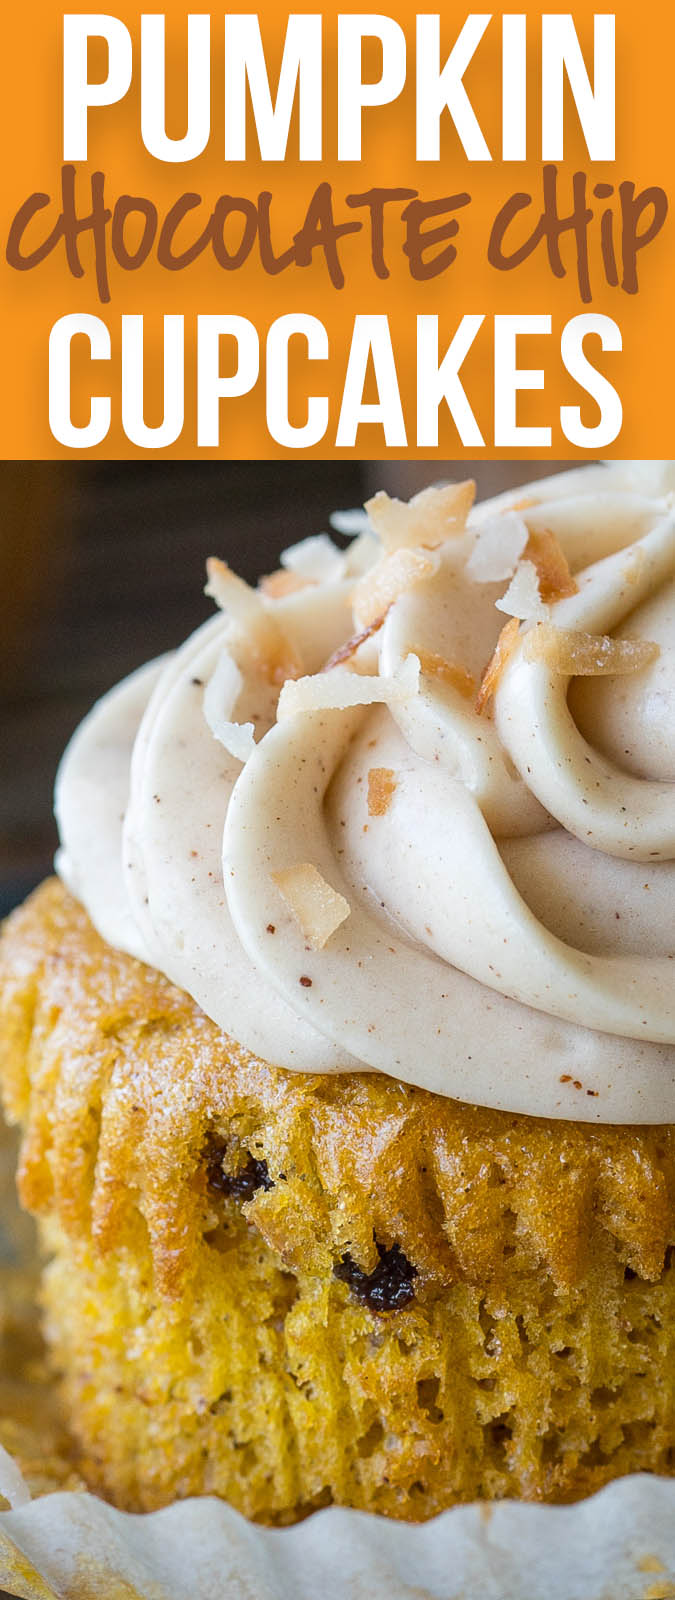 These Pumpkin Chocolate Chip Cupcakes with Spiced Cream Cheese Frosting are insanely delicious and so easy! They start with a box cake mix and I can't wait to make them again!